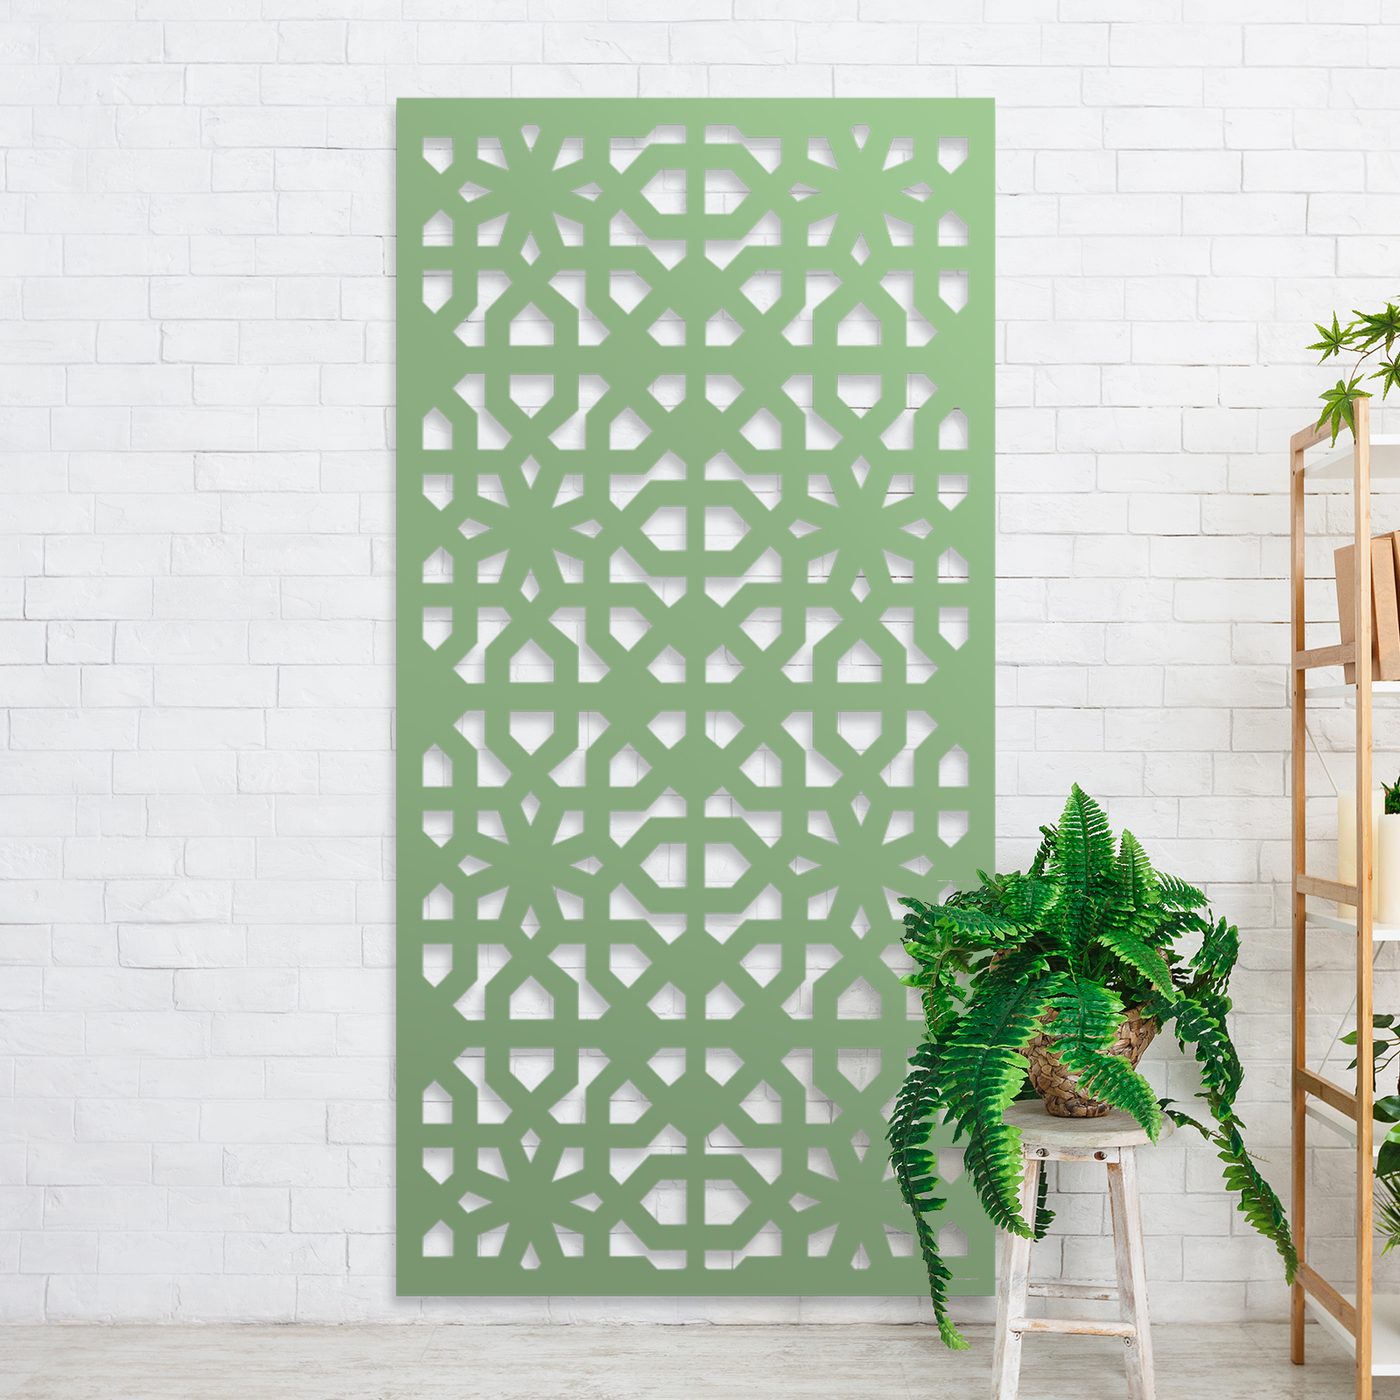 Shikakukei Metal Screen: The Perfect Way to Add Privacy and Style to Your Garden